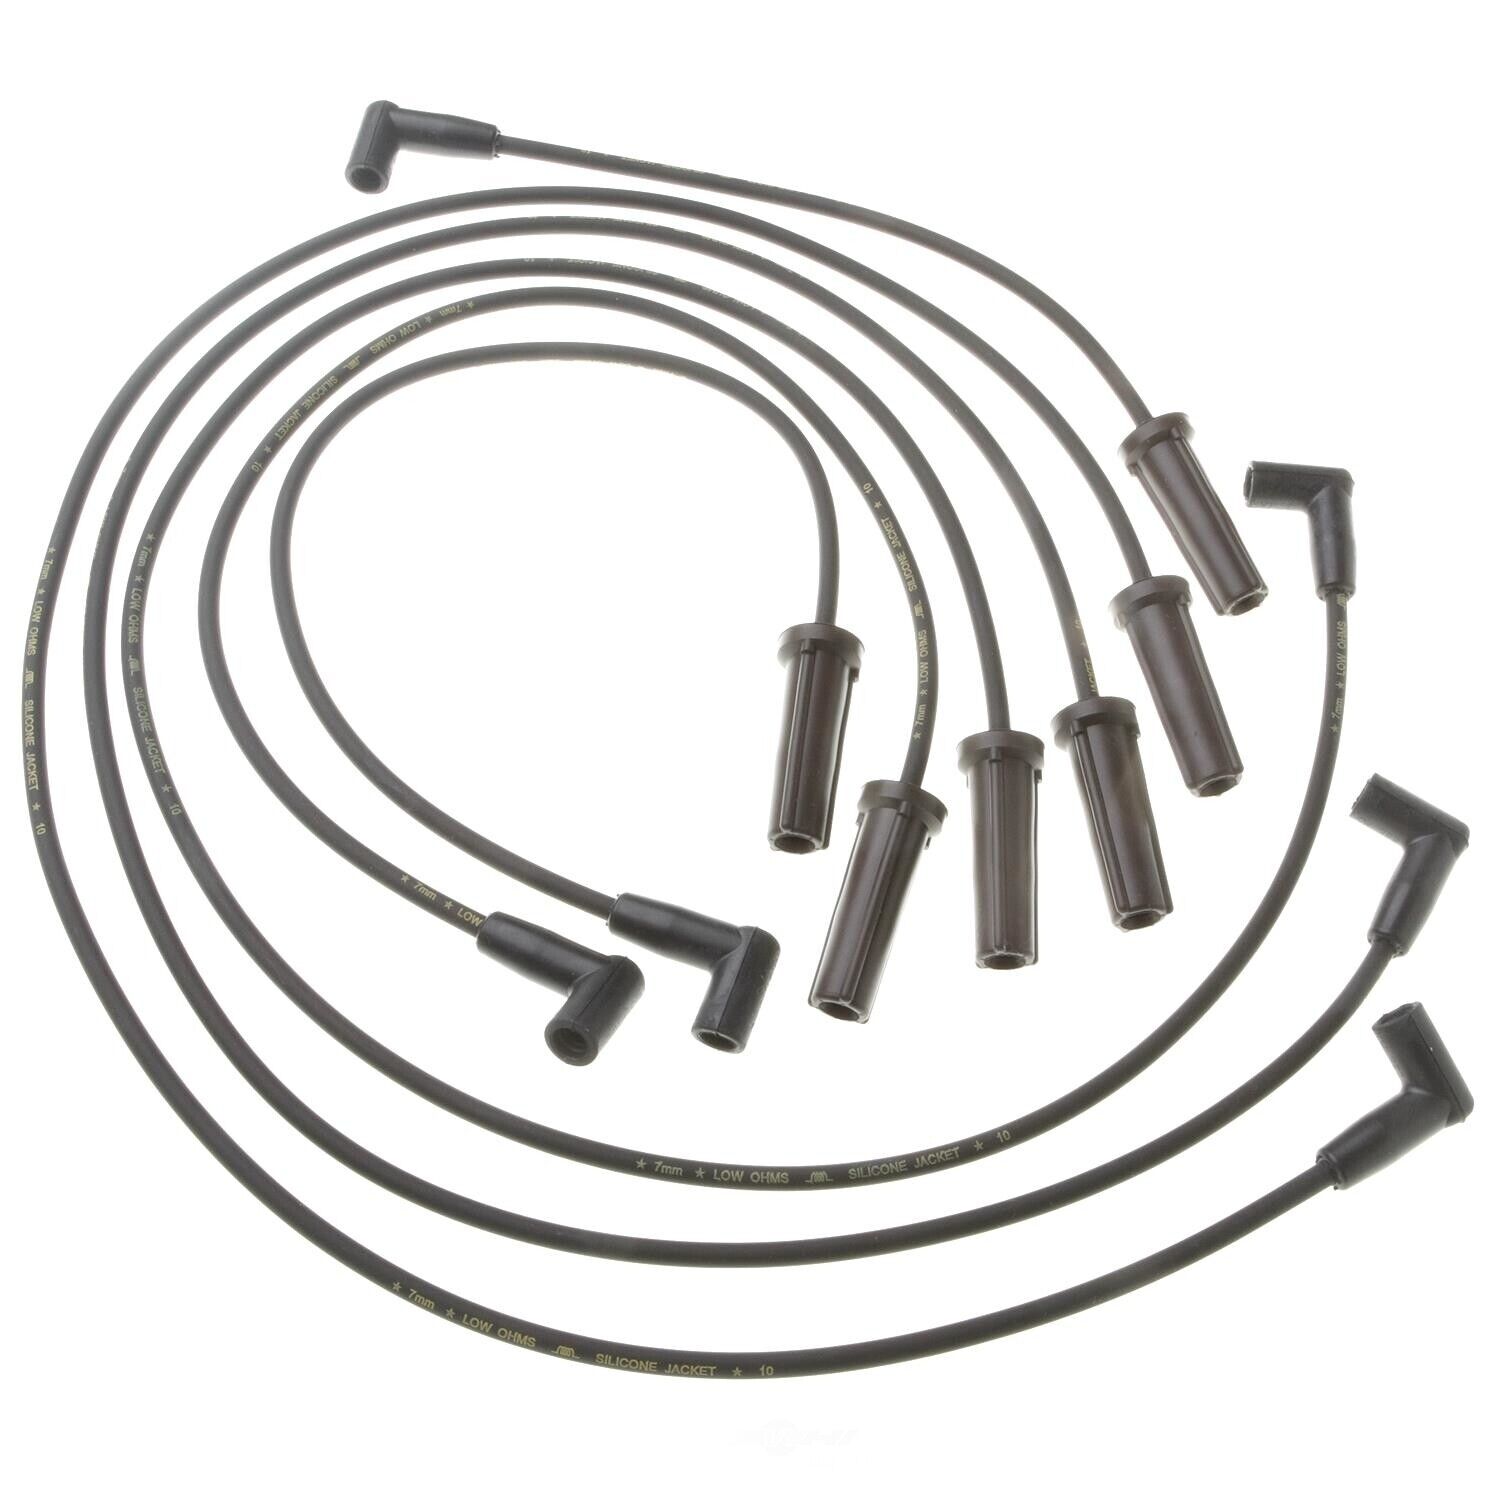 Standard Motor Products 27672 Spark Plug Wire Set